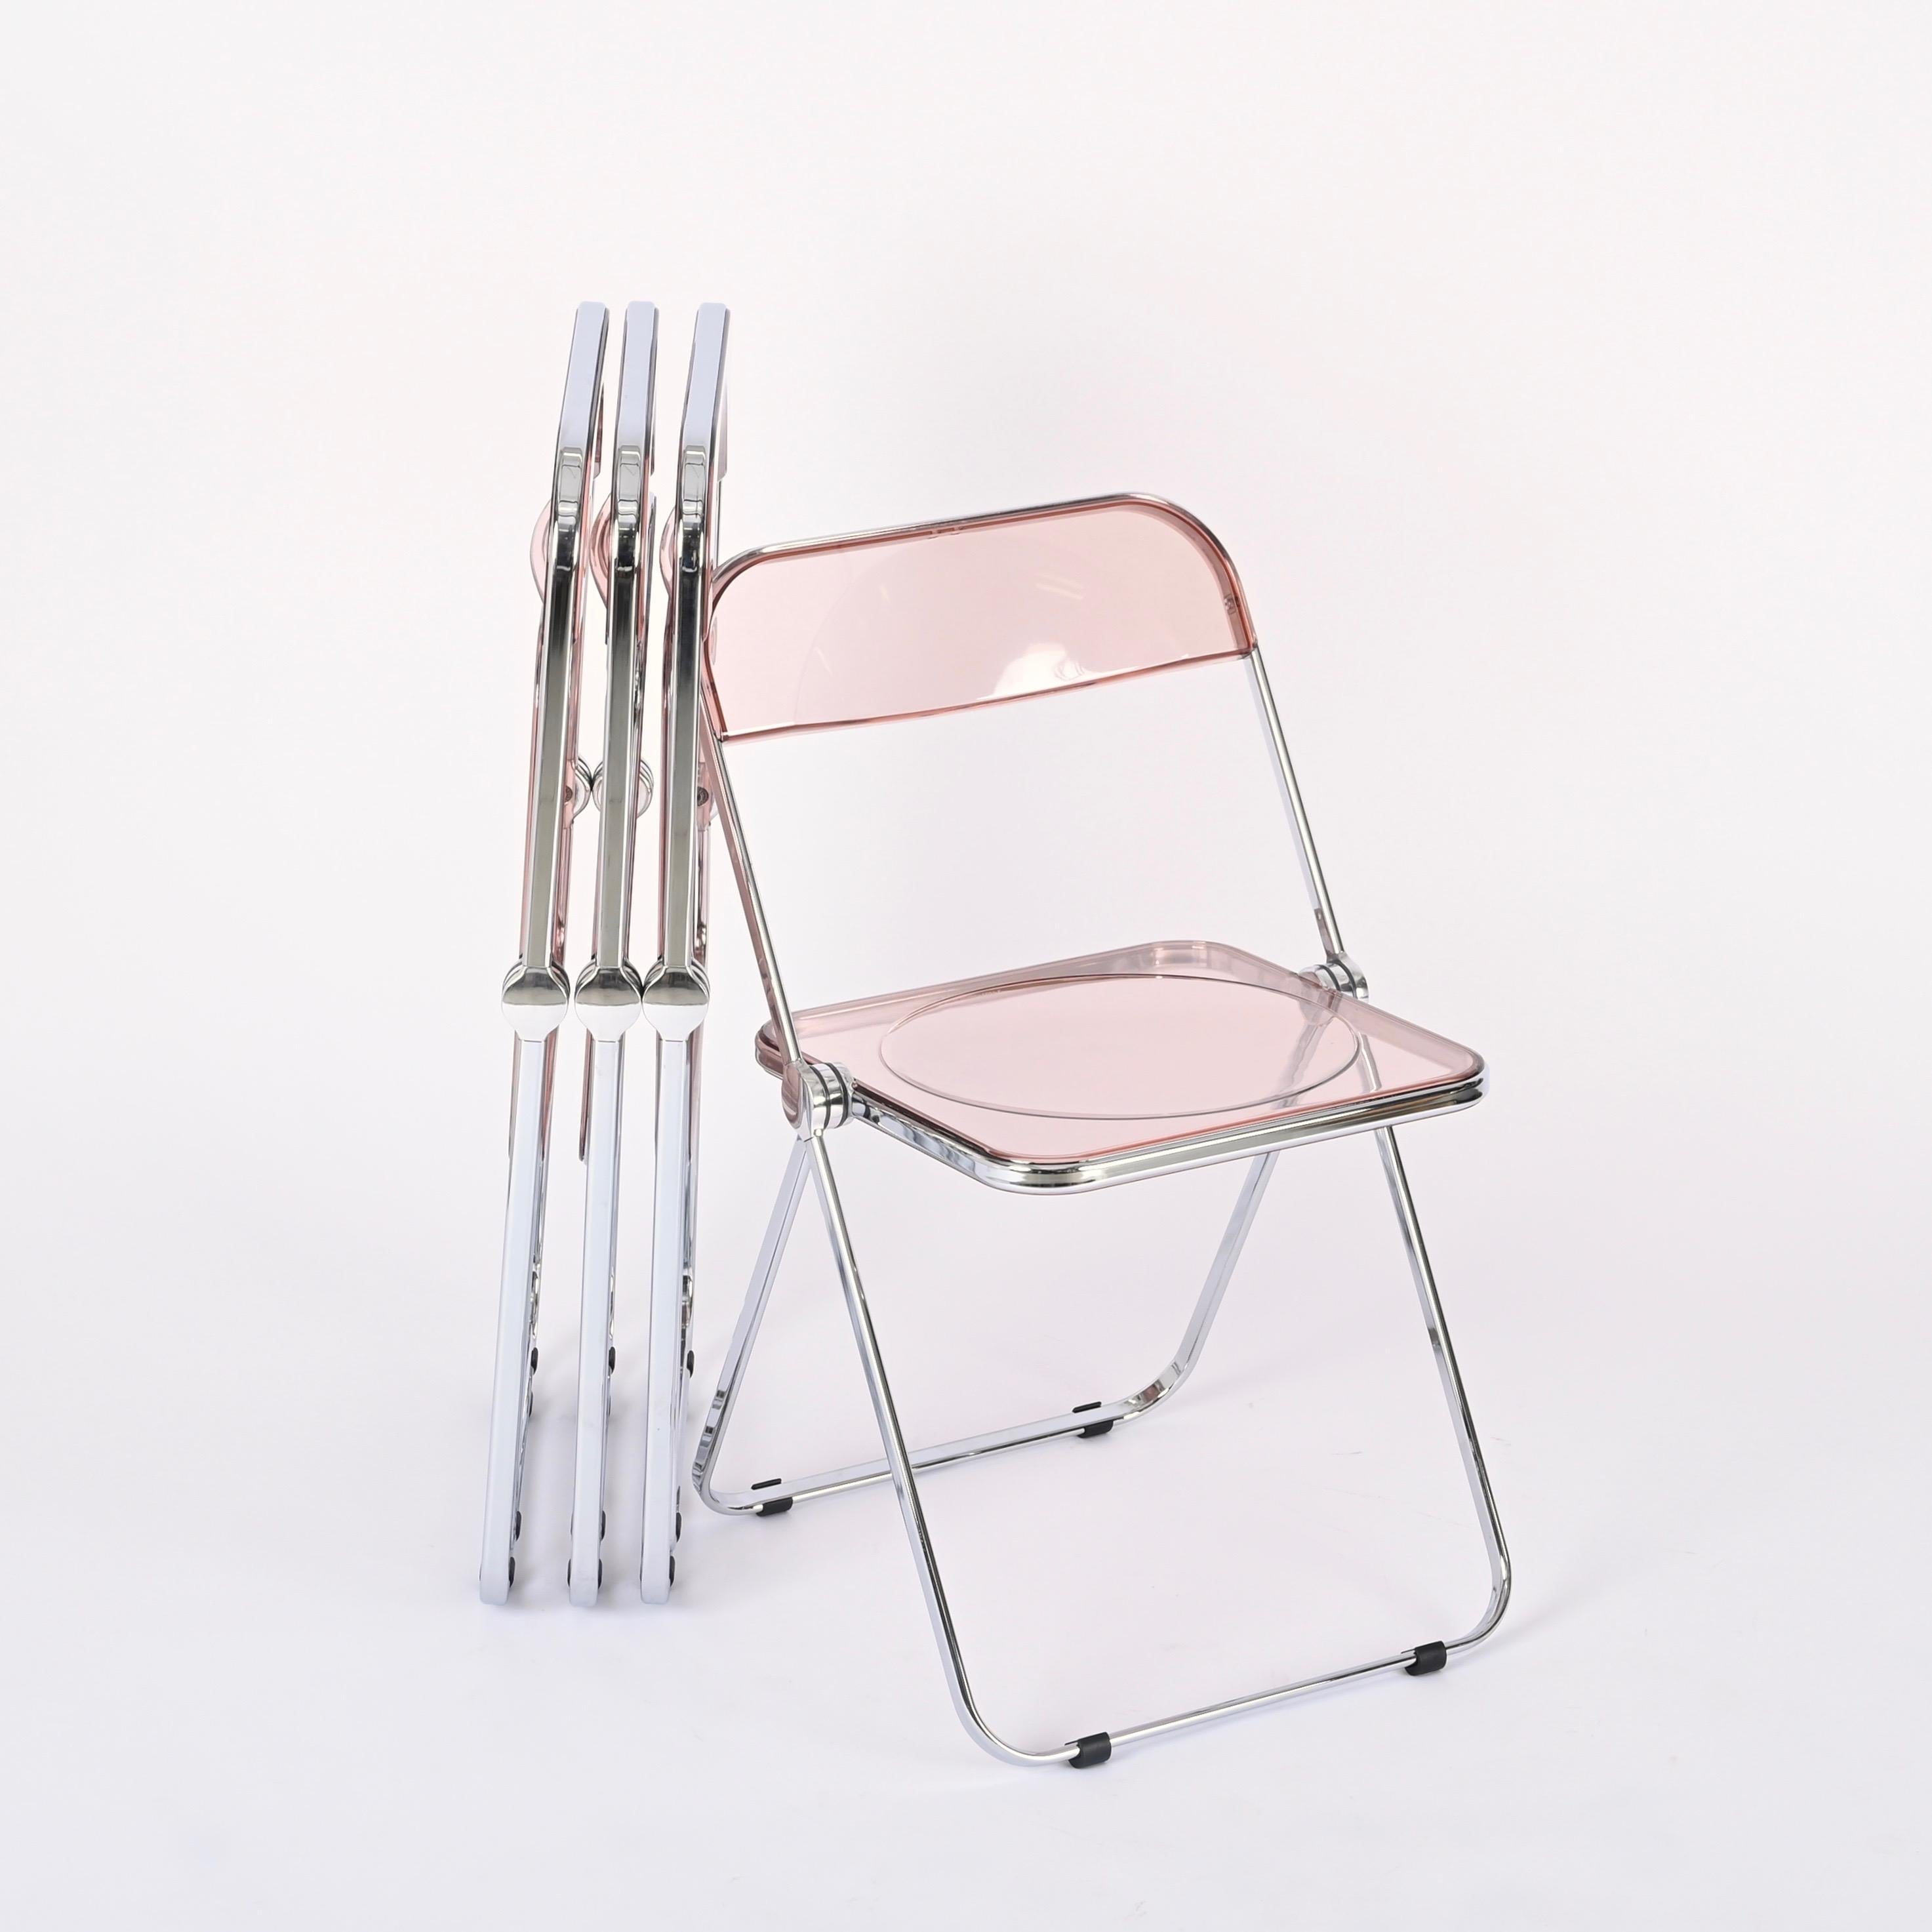 Mid-Century Modern Set of 4 Lucite Pink and Chrome Plia Chairs, Piretti for Castelli, Italy 1970s For Sale